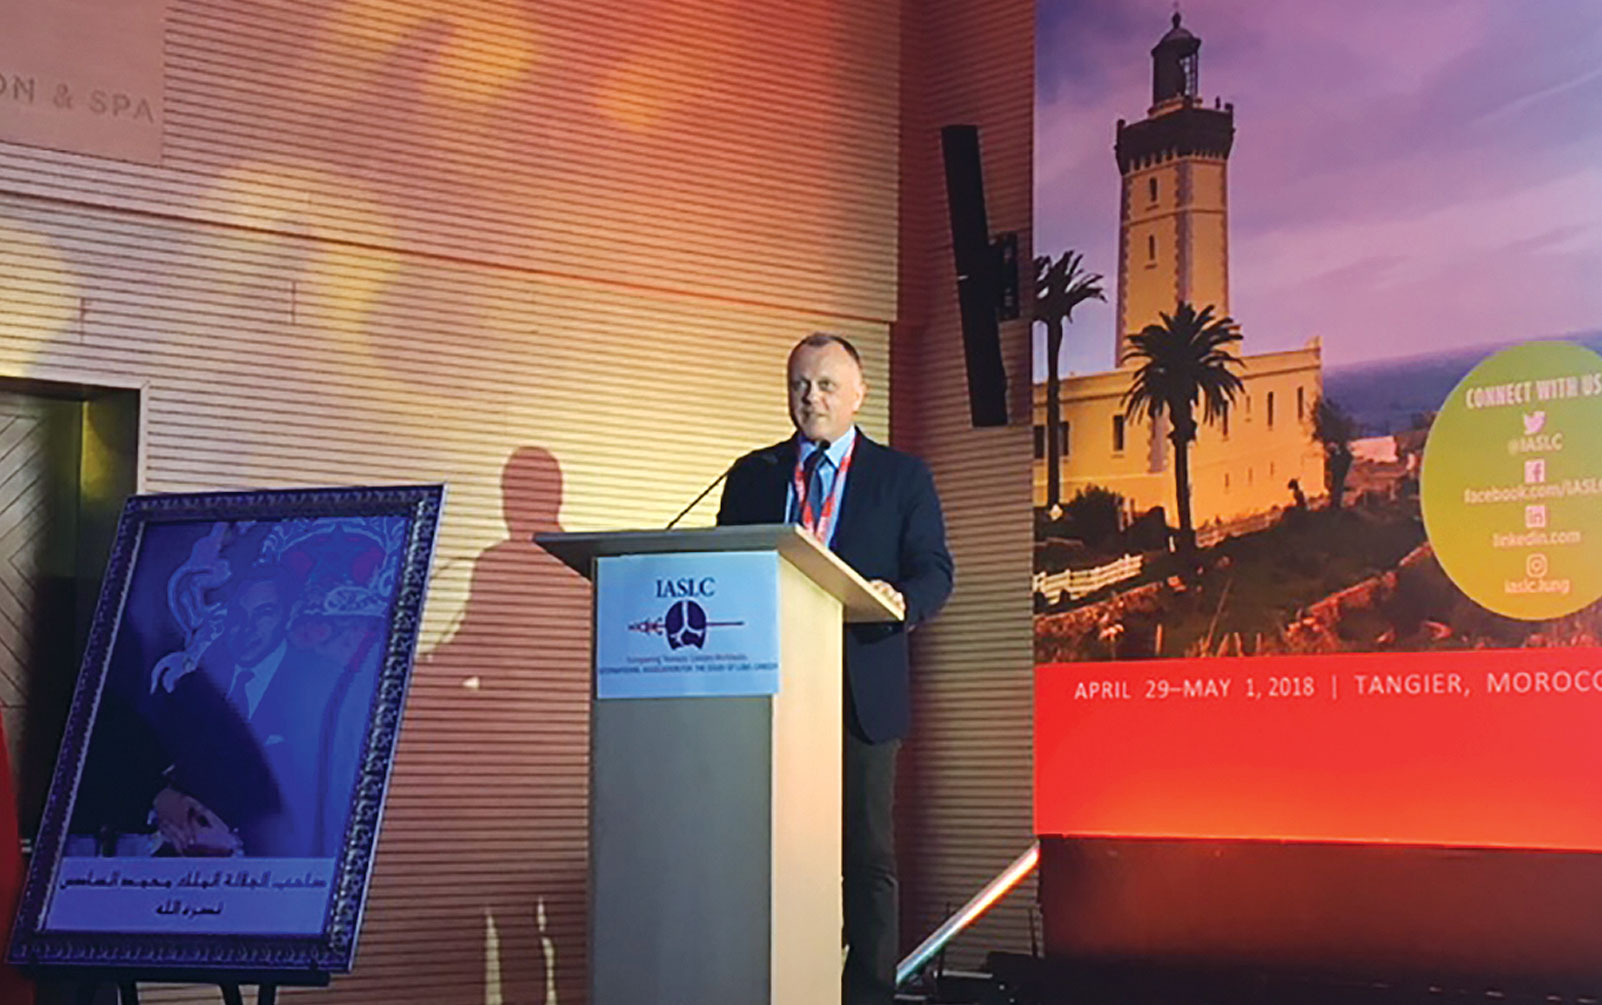 The IASLC Provides More Than Just Scientific Knowledge at Tangier Conference